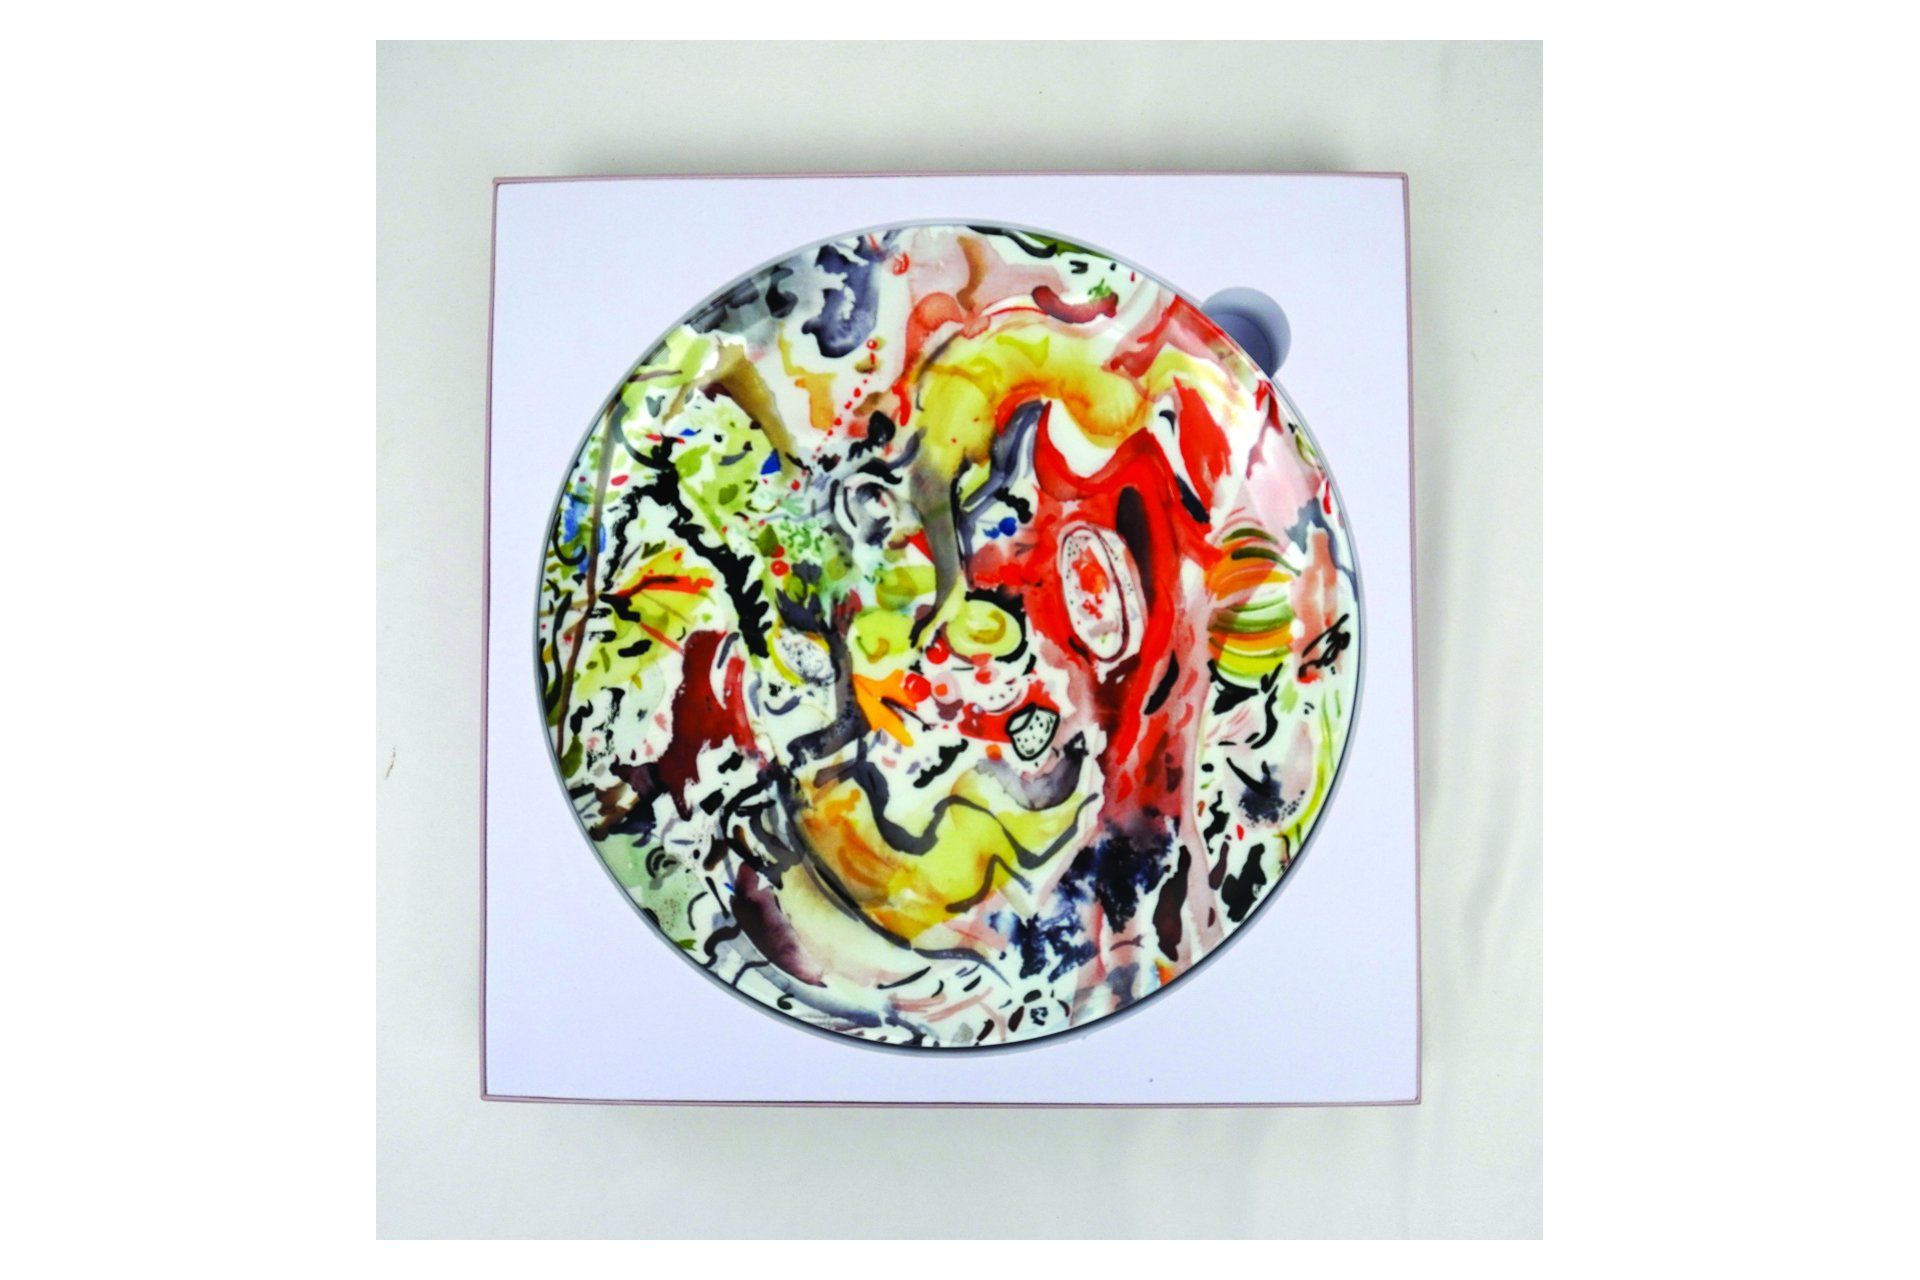 Plate by Cecily Brown